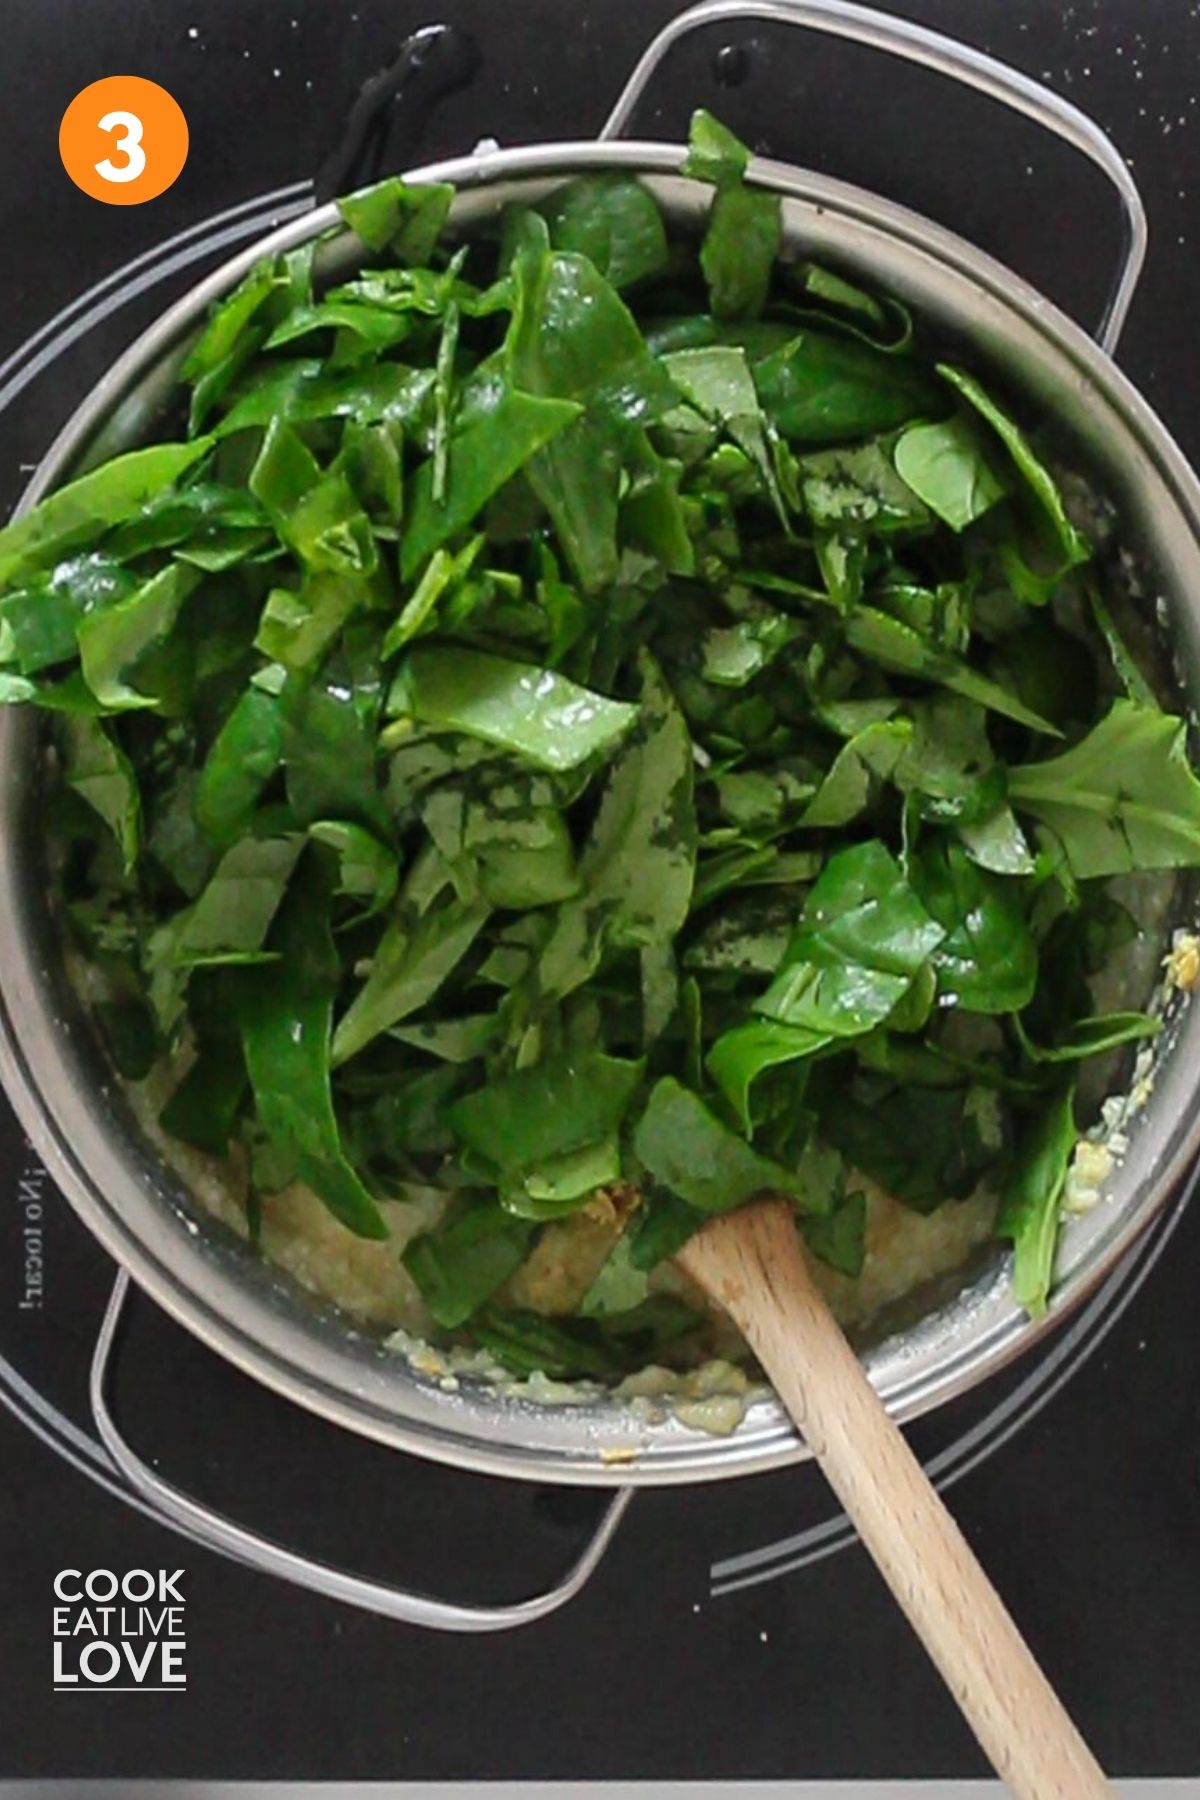 Spinach is added to the pot of grits.